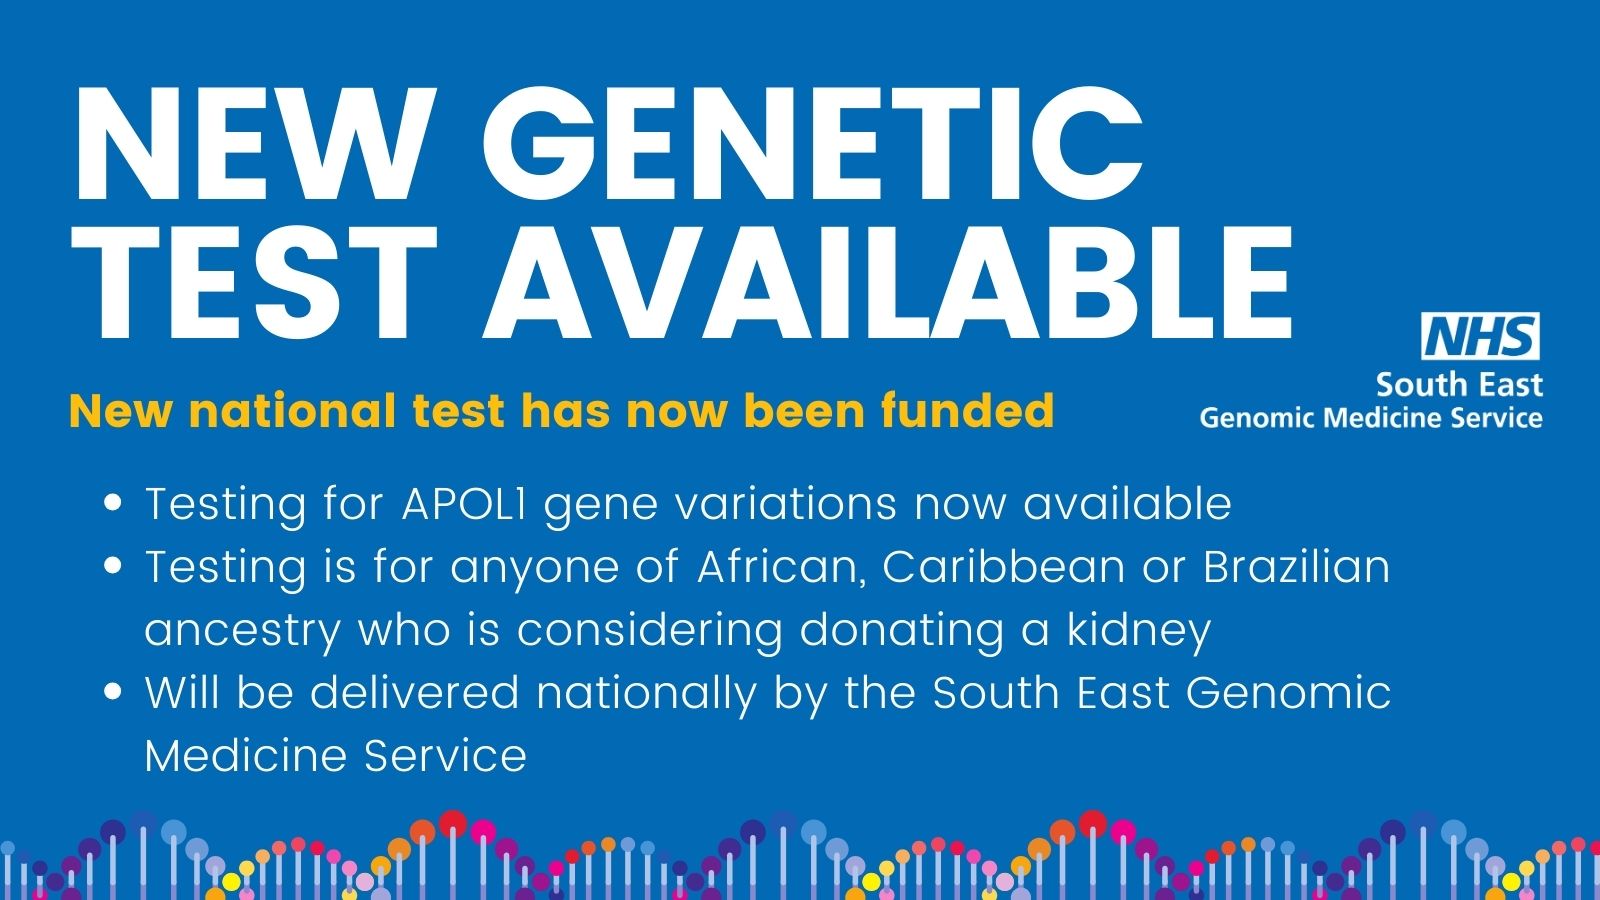 Graphic with information about a new genetic test for people of African & Caribbean ancestry who are considering donating a live kidney.